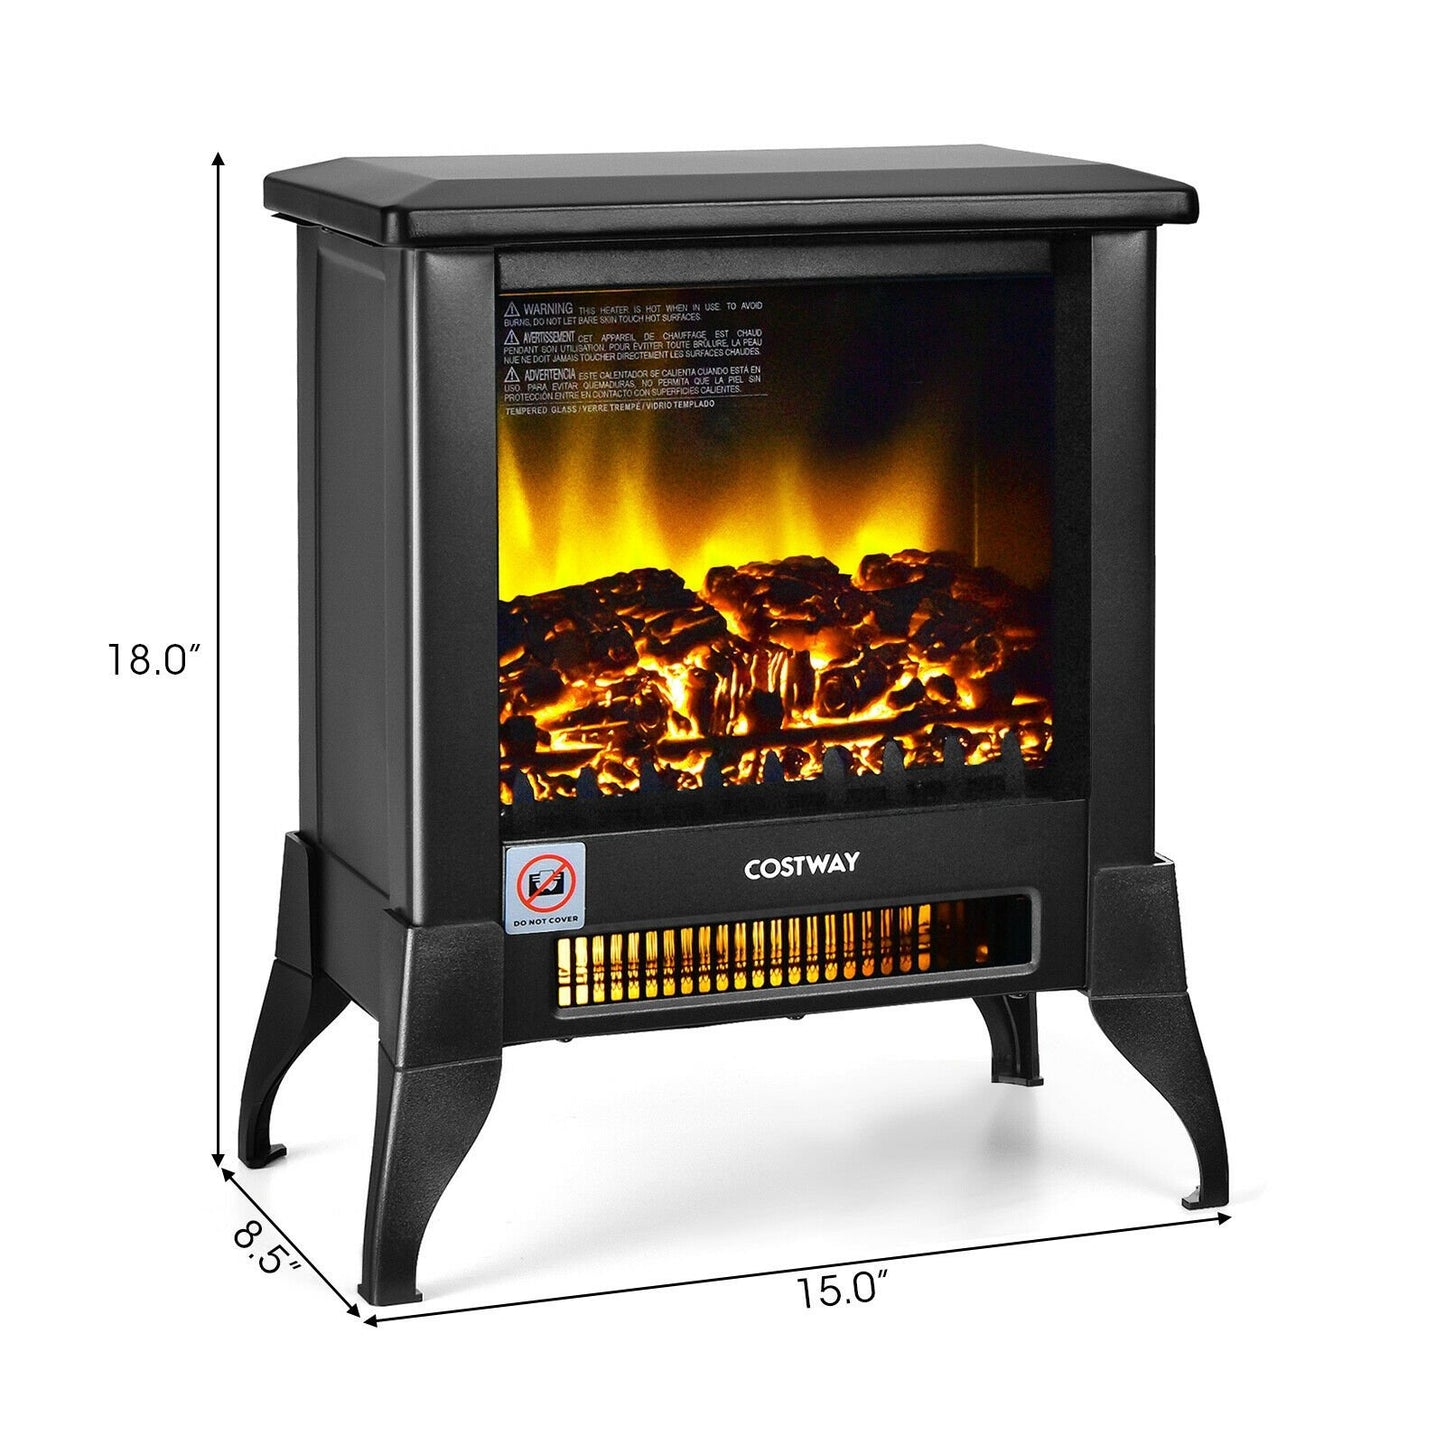 Compact Portable Space Heater with Realistic Flame Effect-Black